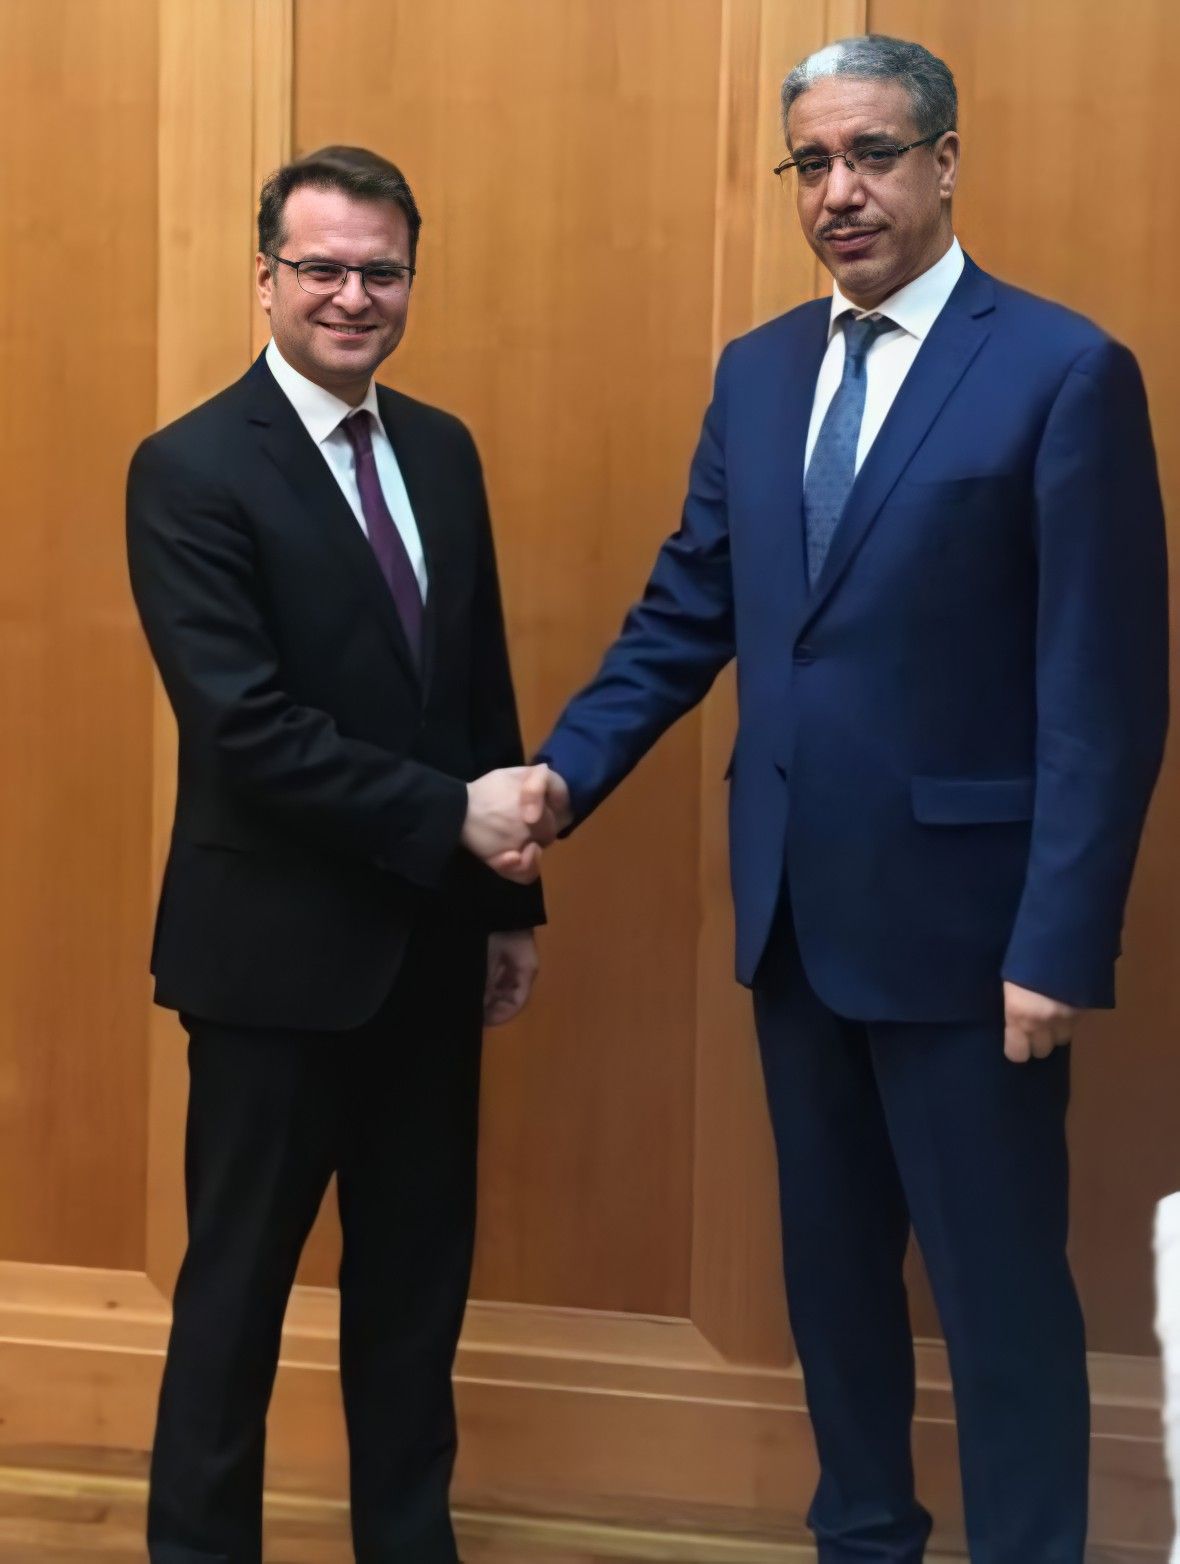 HEM Aziz RABBAH Minister of Energy, Mines and Environment (MEME) bilaterally with Andreas FEICHT State Secretary at the Federal Ministry of Economic Affairs and Energy (BMWi) on the fringes of the BETD 2019.